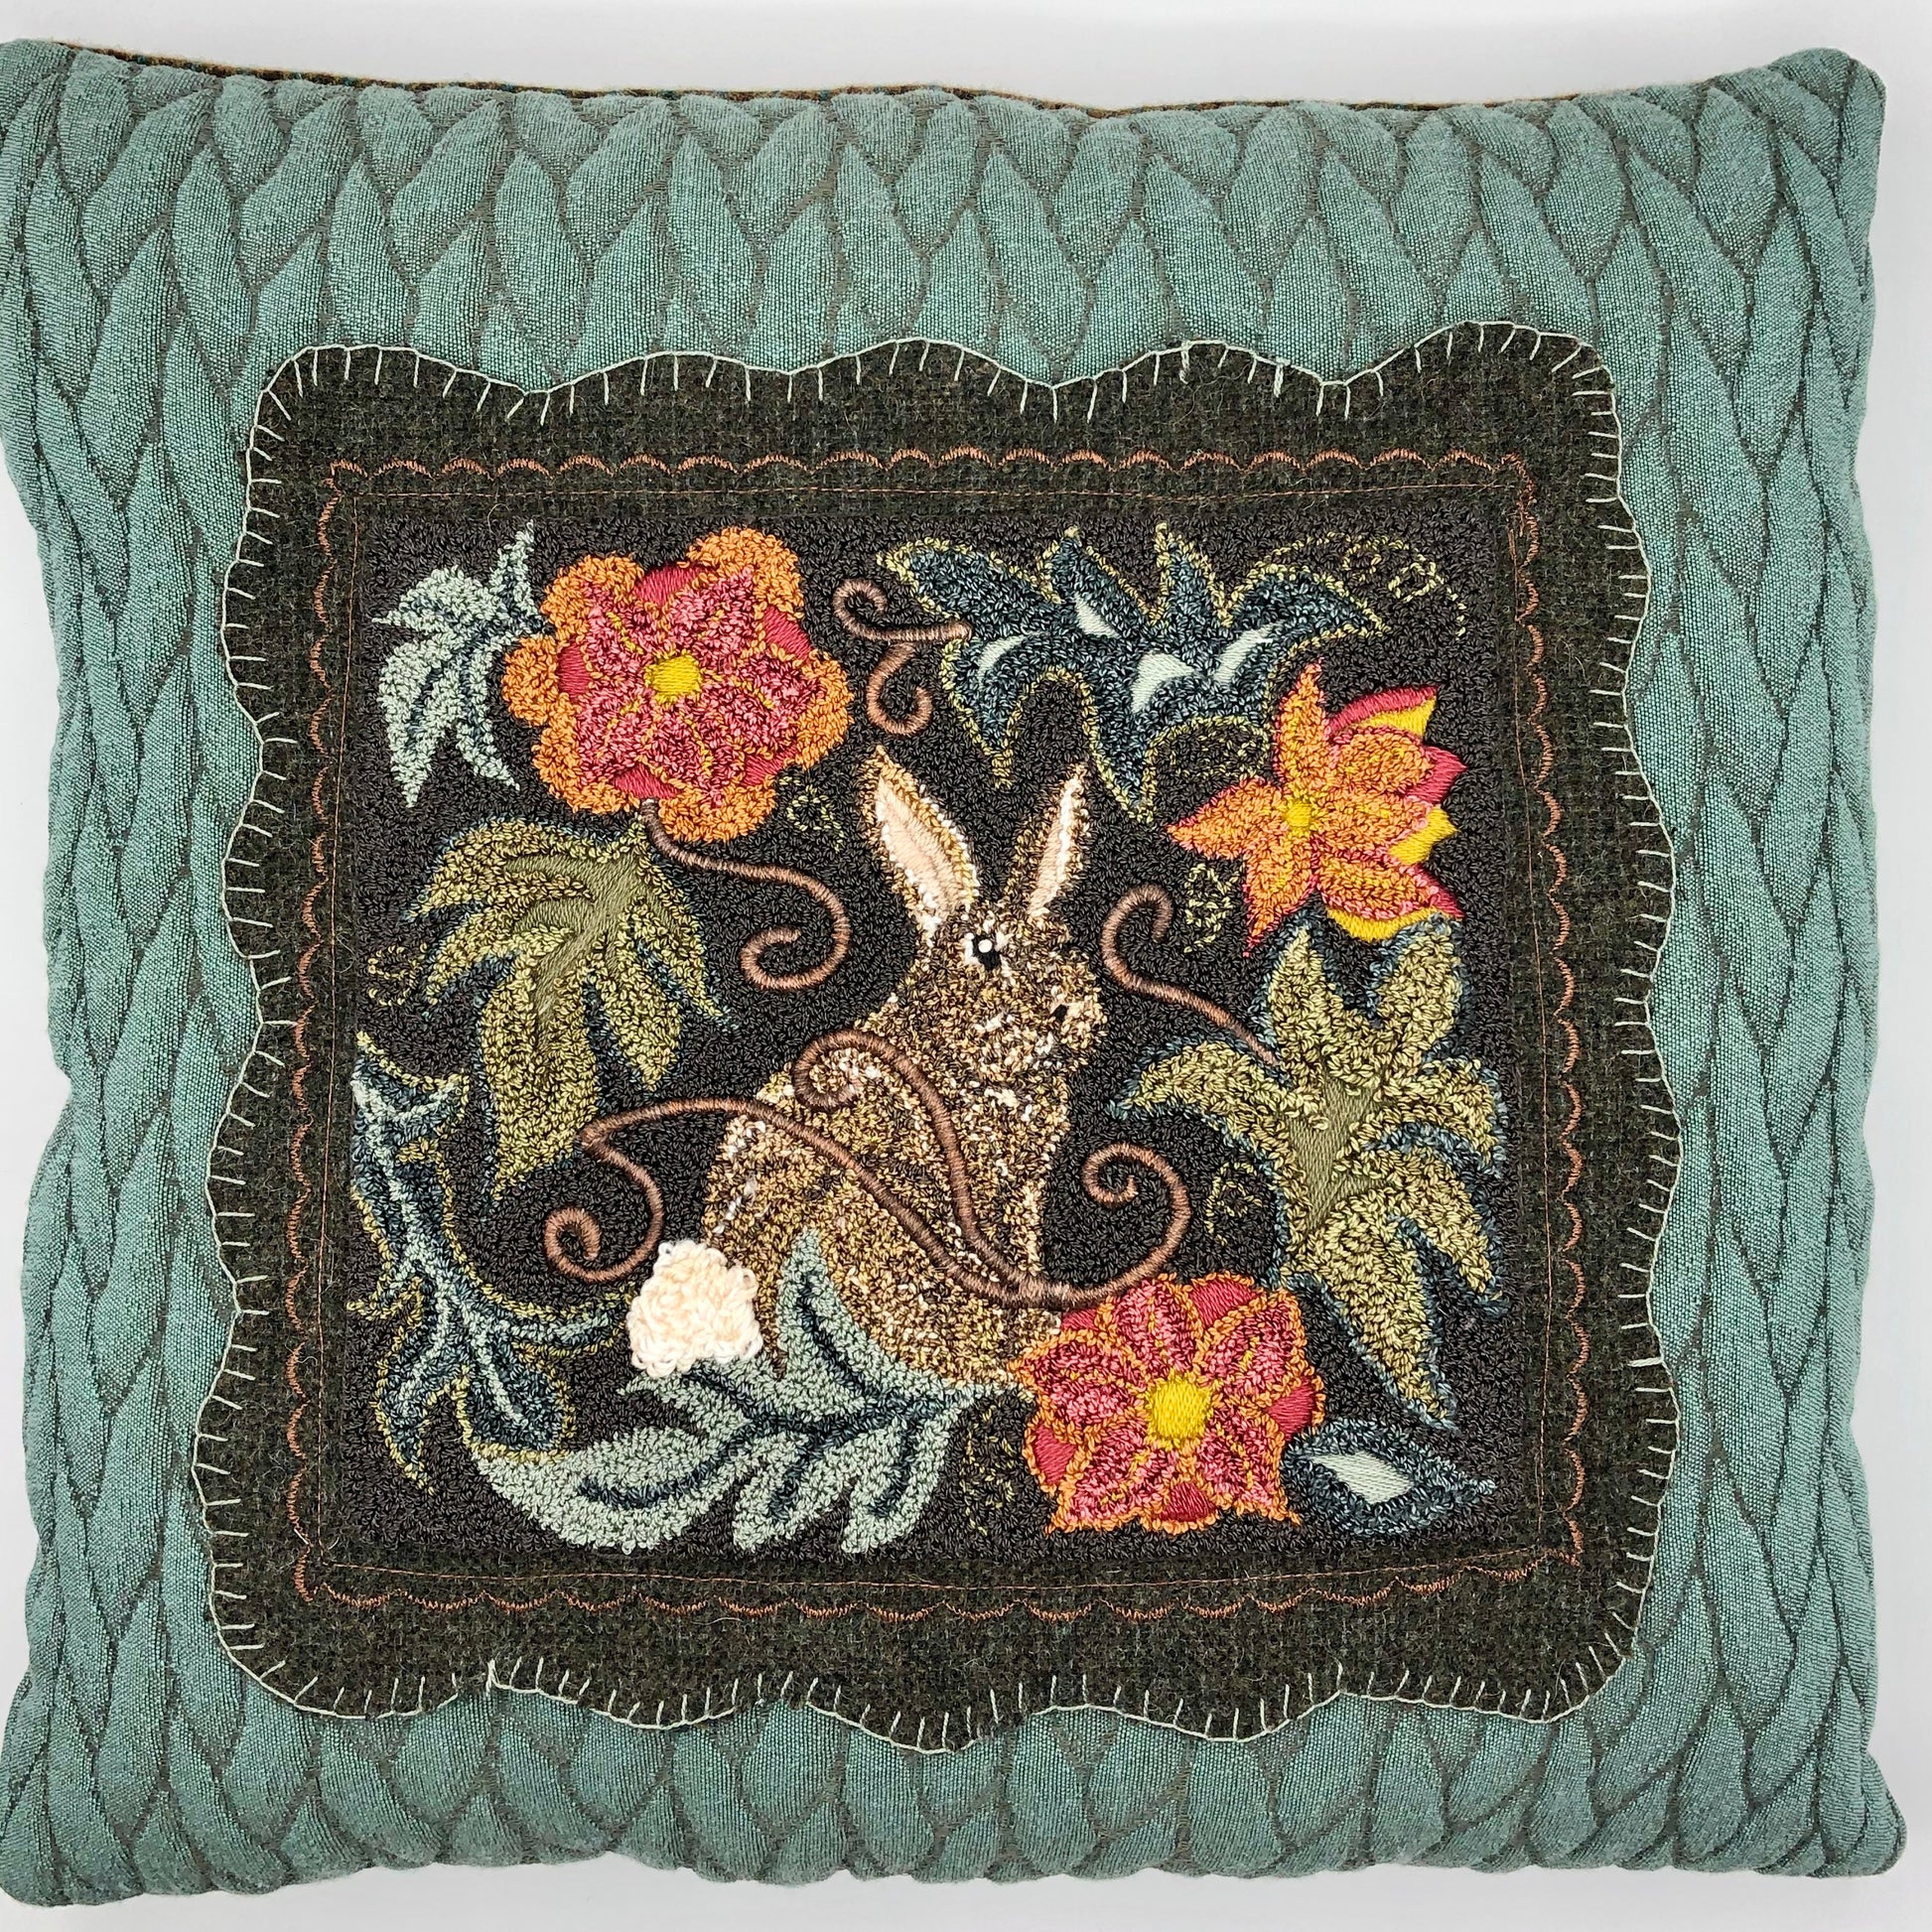 Garden Rabbit Punch Needle pattern by Orphaned Wool. Design can be finished using Valdani Threads or Dmc Floss. Beautiful  Garden Rabbit pattern with flowers and leaves. A lovely pillow design.